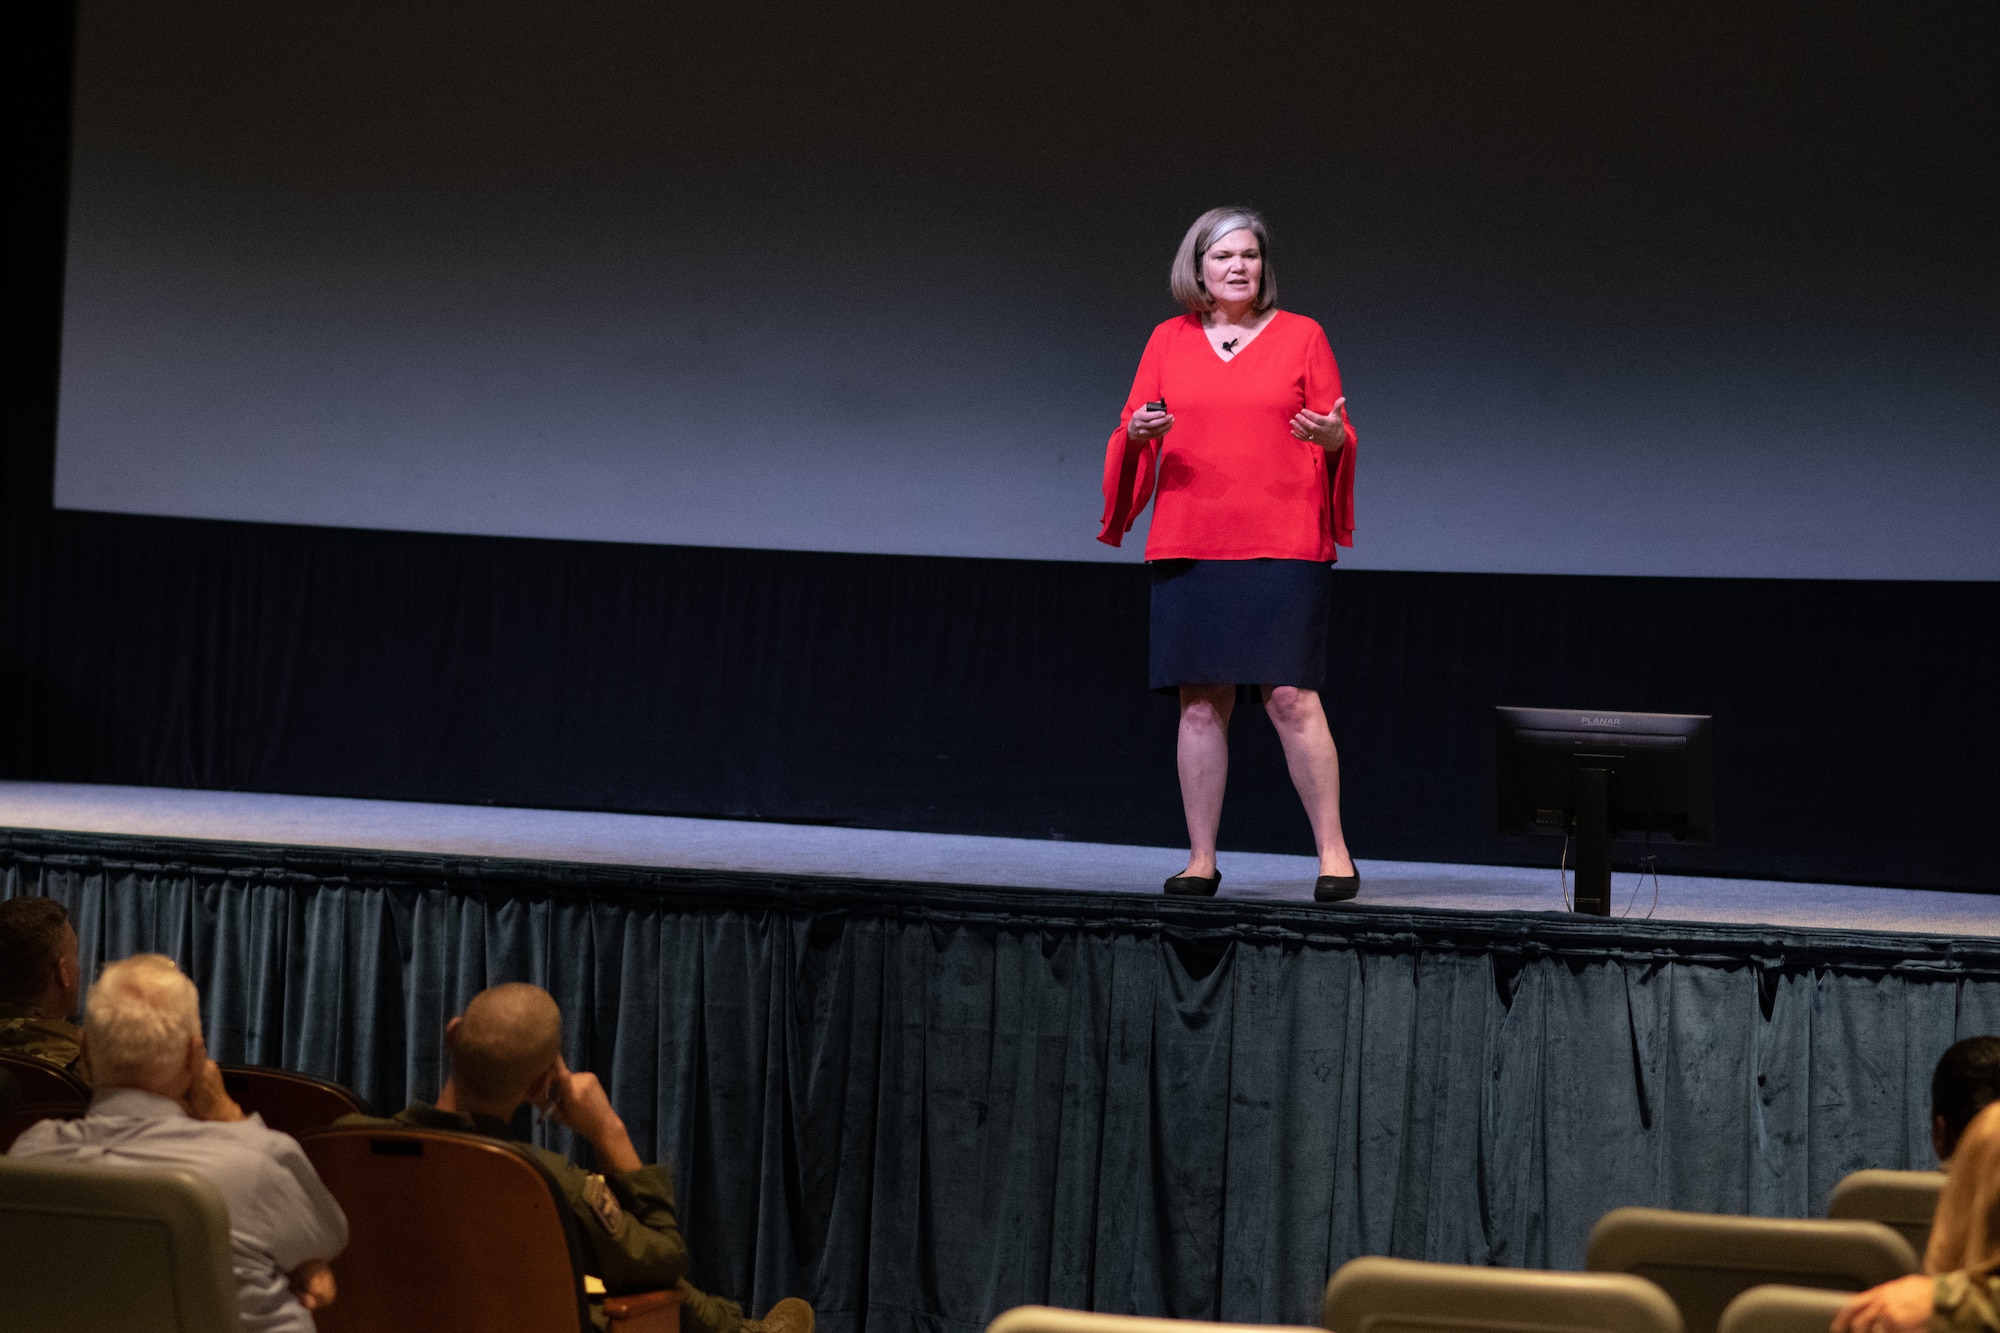 Kristen Christy, 2018 Air Force Spouse of the Year, speaks with Air University personnel Dec. 9, 2019, on Maxwell Air Force Base, Alabama. Christy opened up to the crowd, sharing her life story and giving advice for dealing with adversity. (U.S. Air Force photo by Senior Airman Charles Welty)